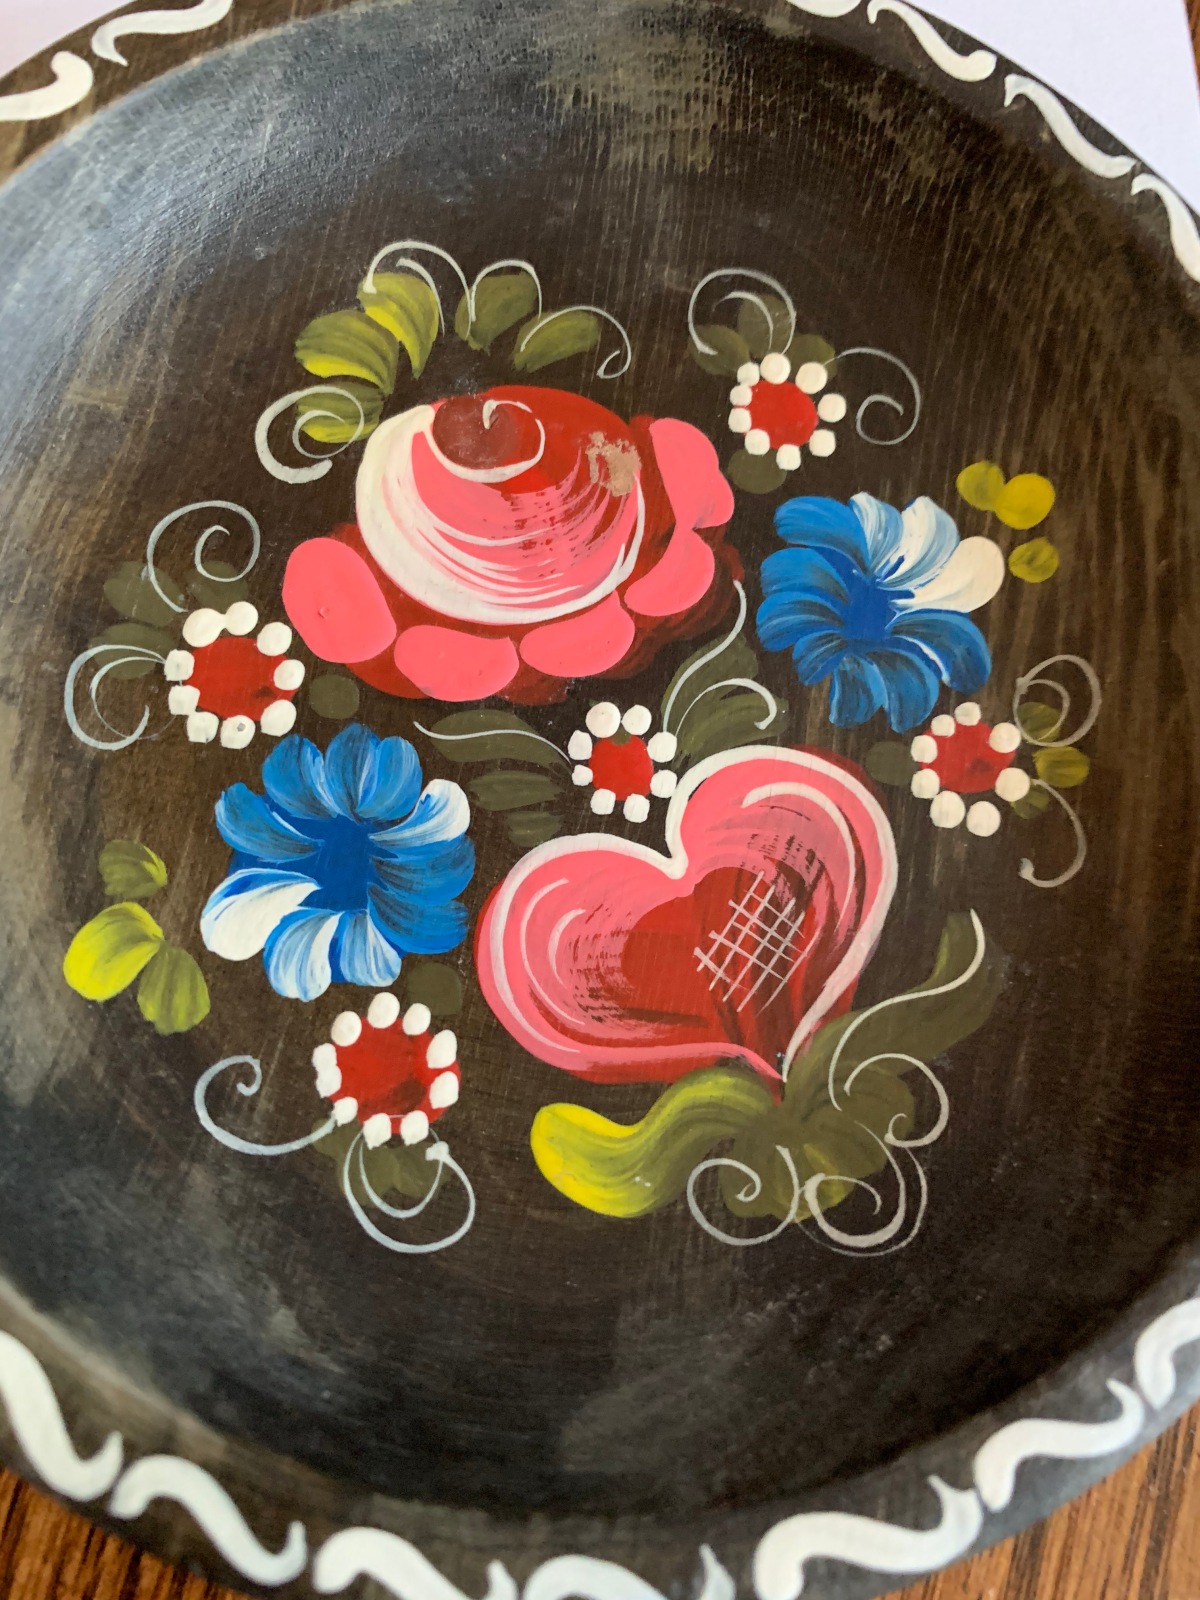 A little dish that I've had since childhood apparently has rosemaling on it!